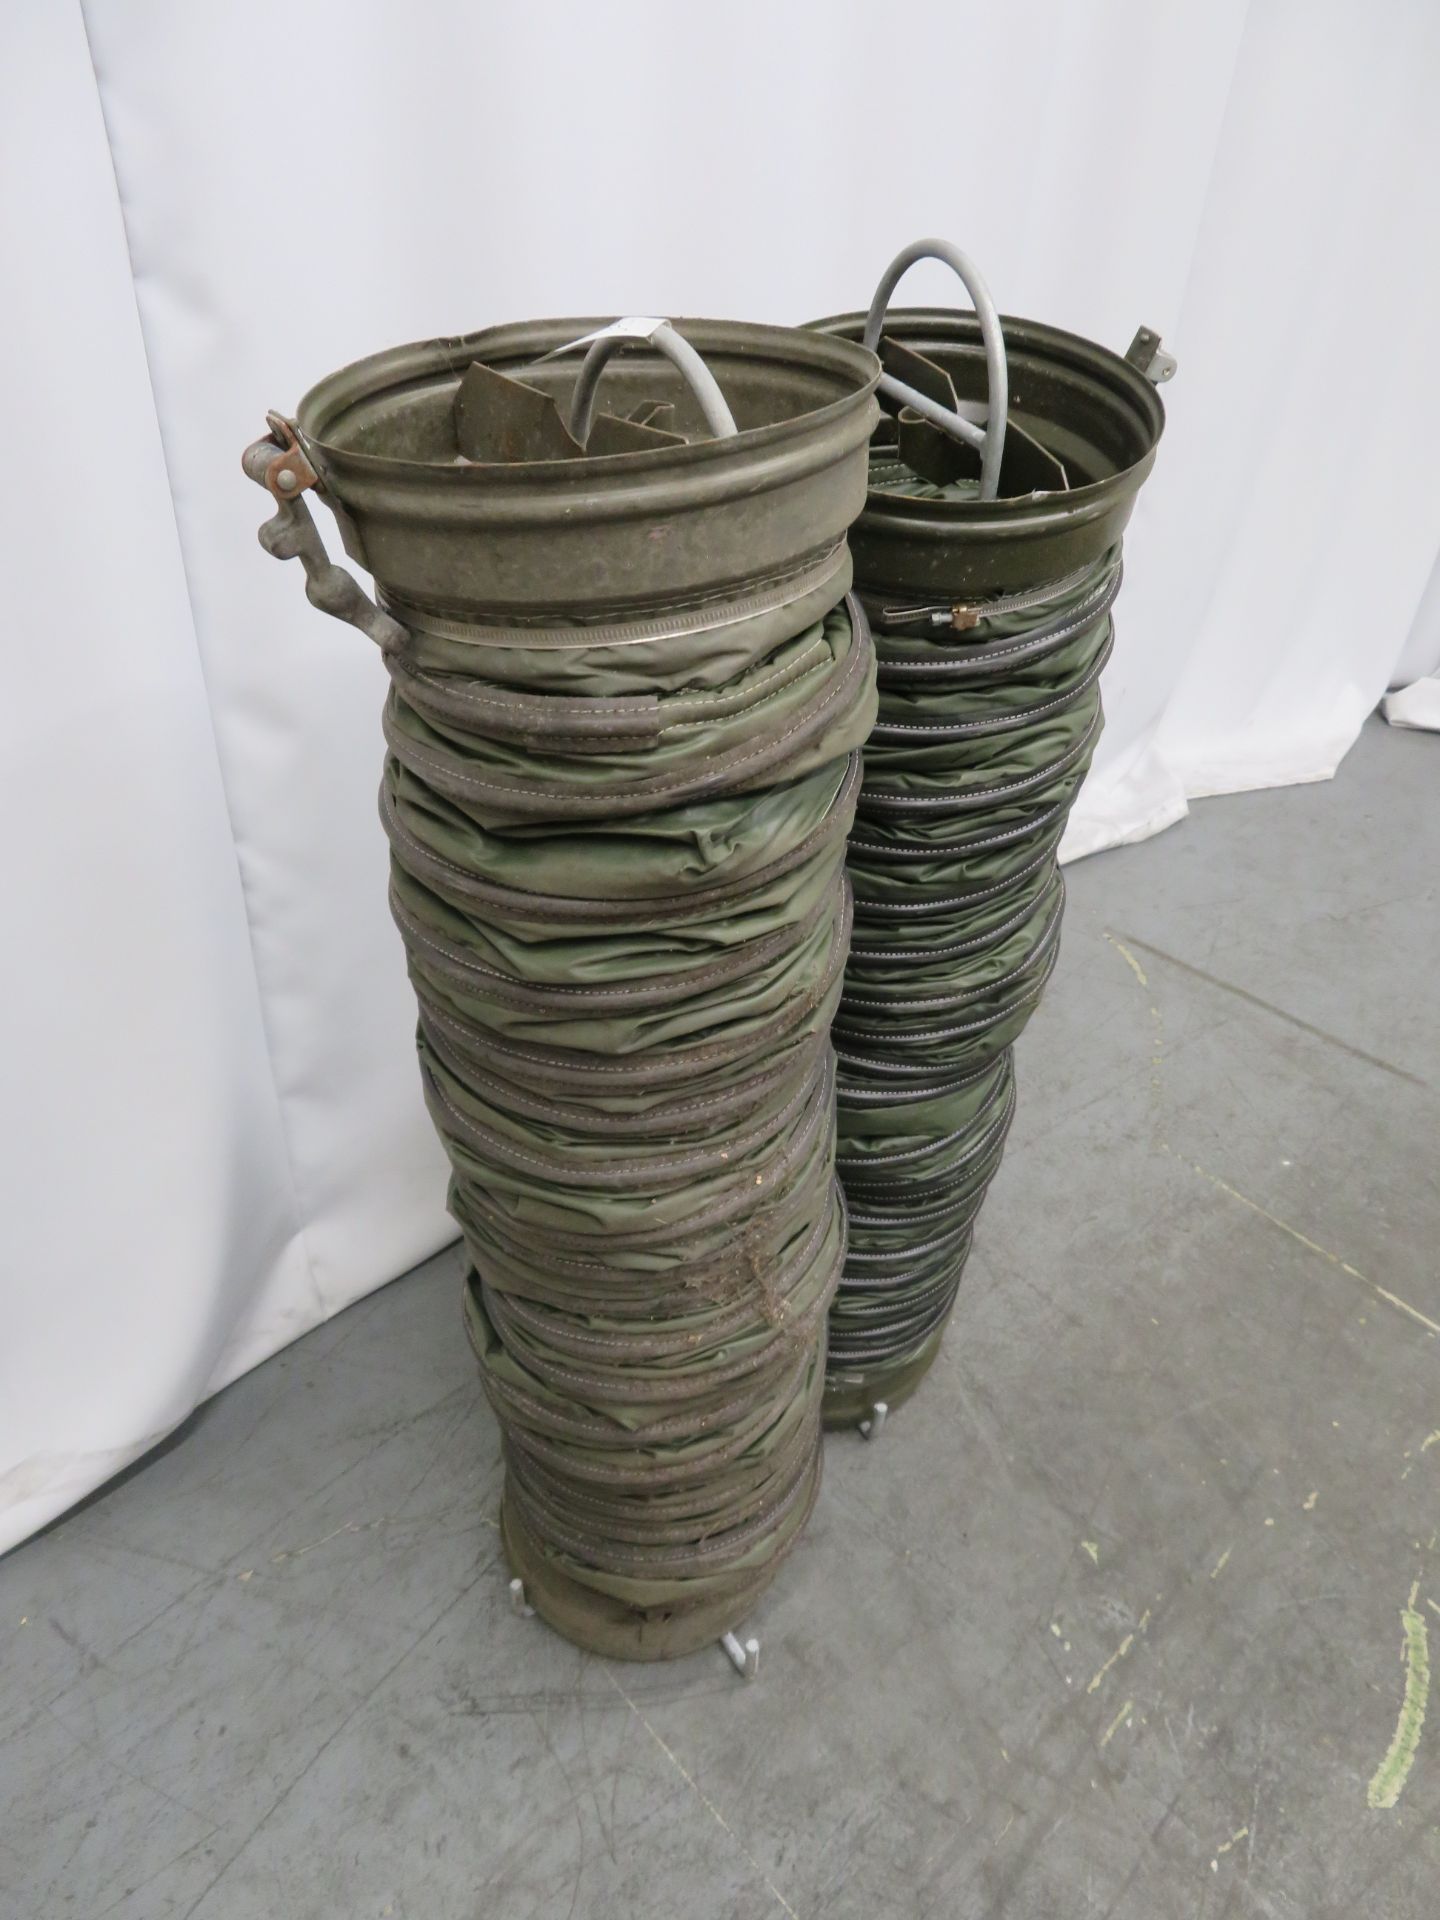 2x Dantherm VA-M 40 Flexible Ducting. Length Approx 3m. - Image 2 of 3